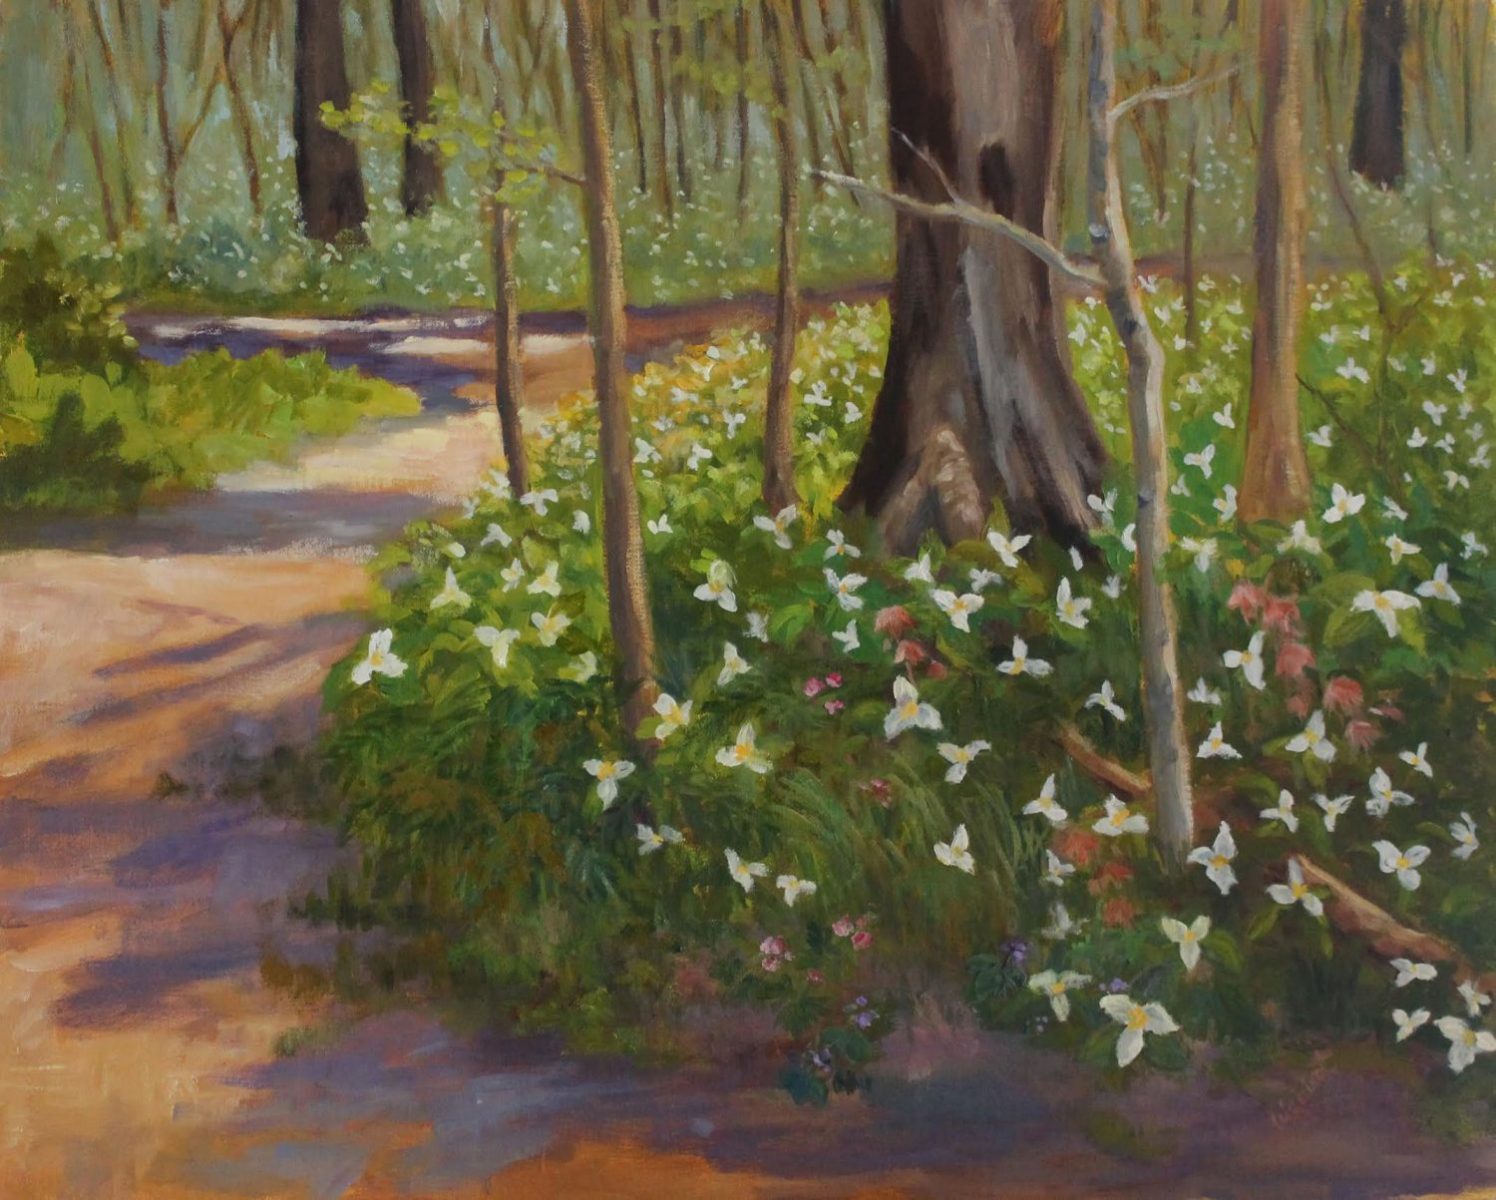 A painting titled "Trilliums at Wildwood" by Ann Waisbrot, whose work and studio will be featured in the 2016 Northwoods Art Tour.